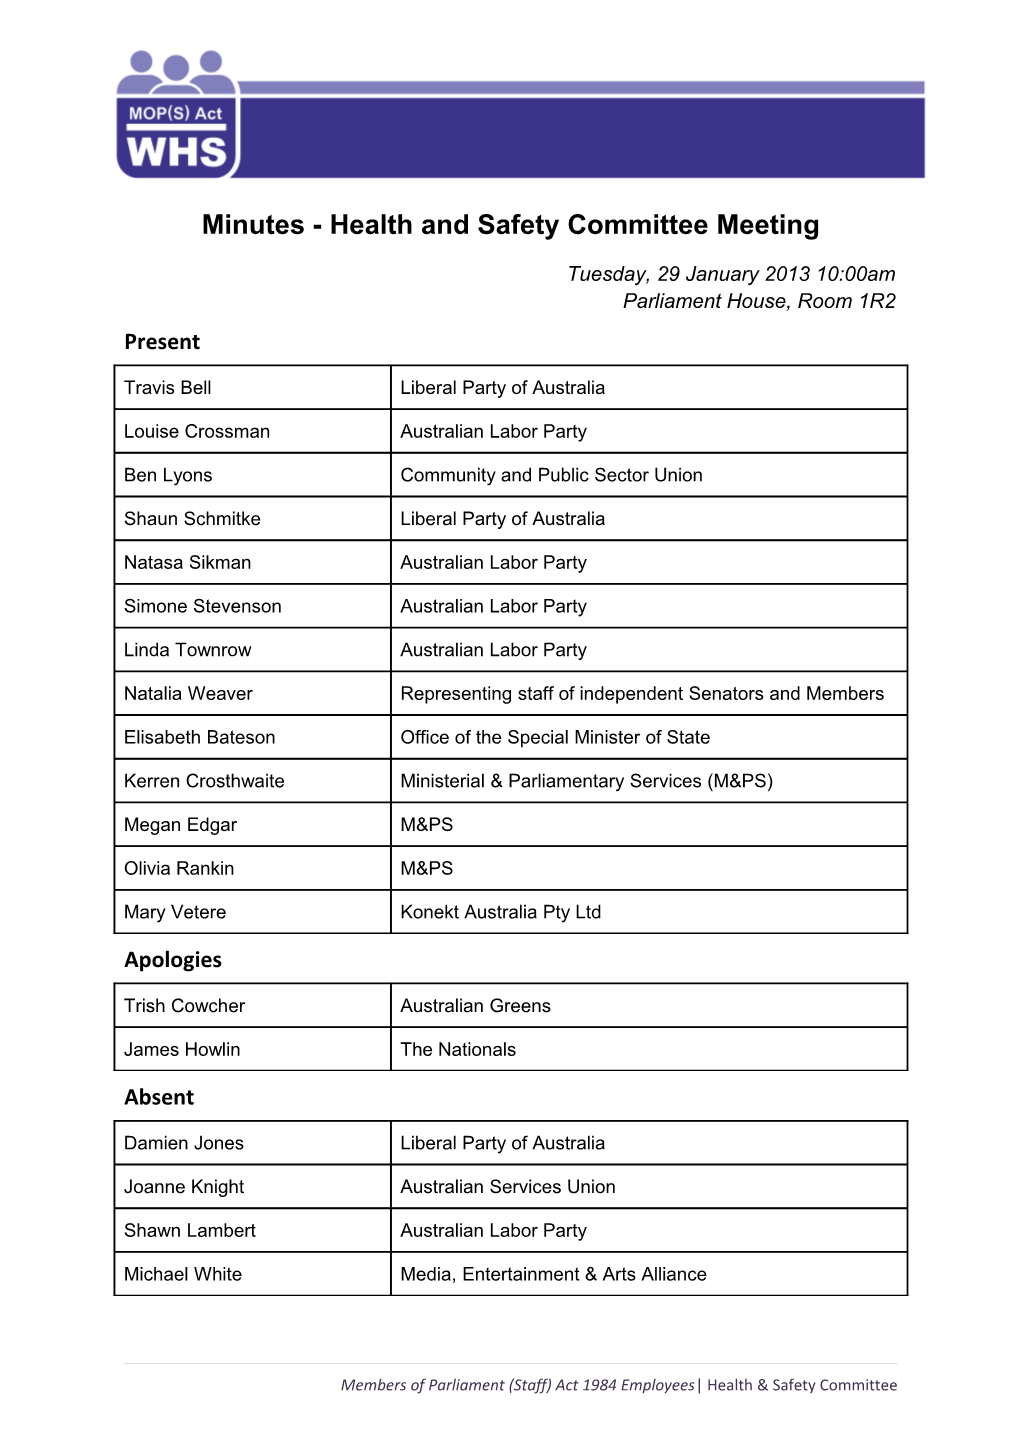 Health and Safety Committee Meeting Minutes - 29 January 2013